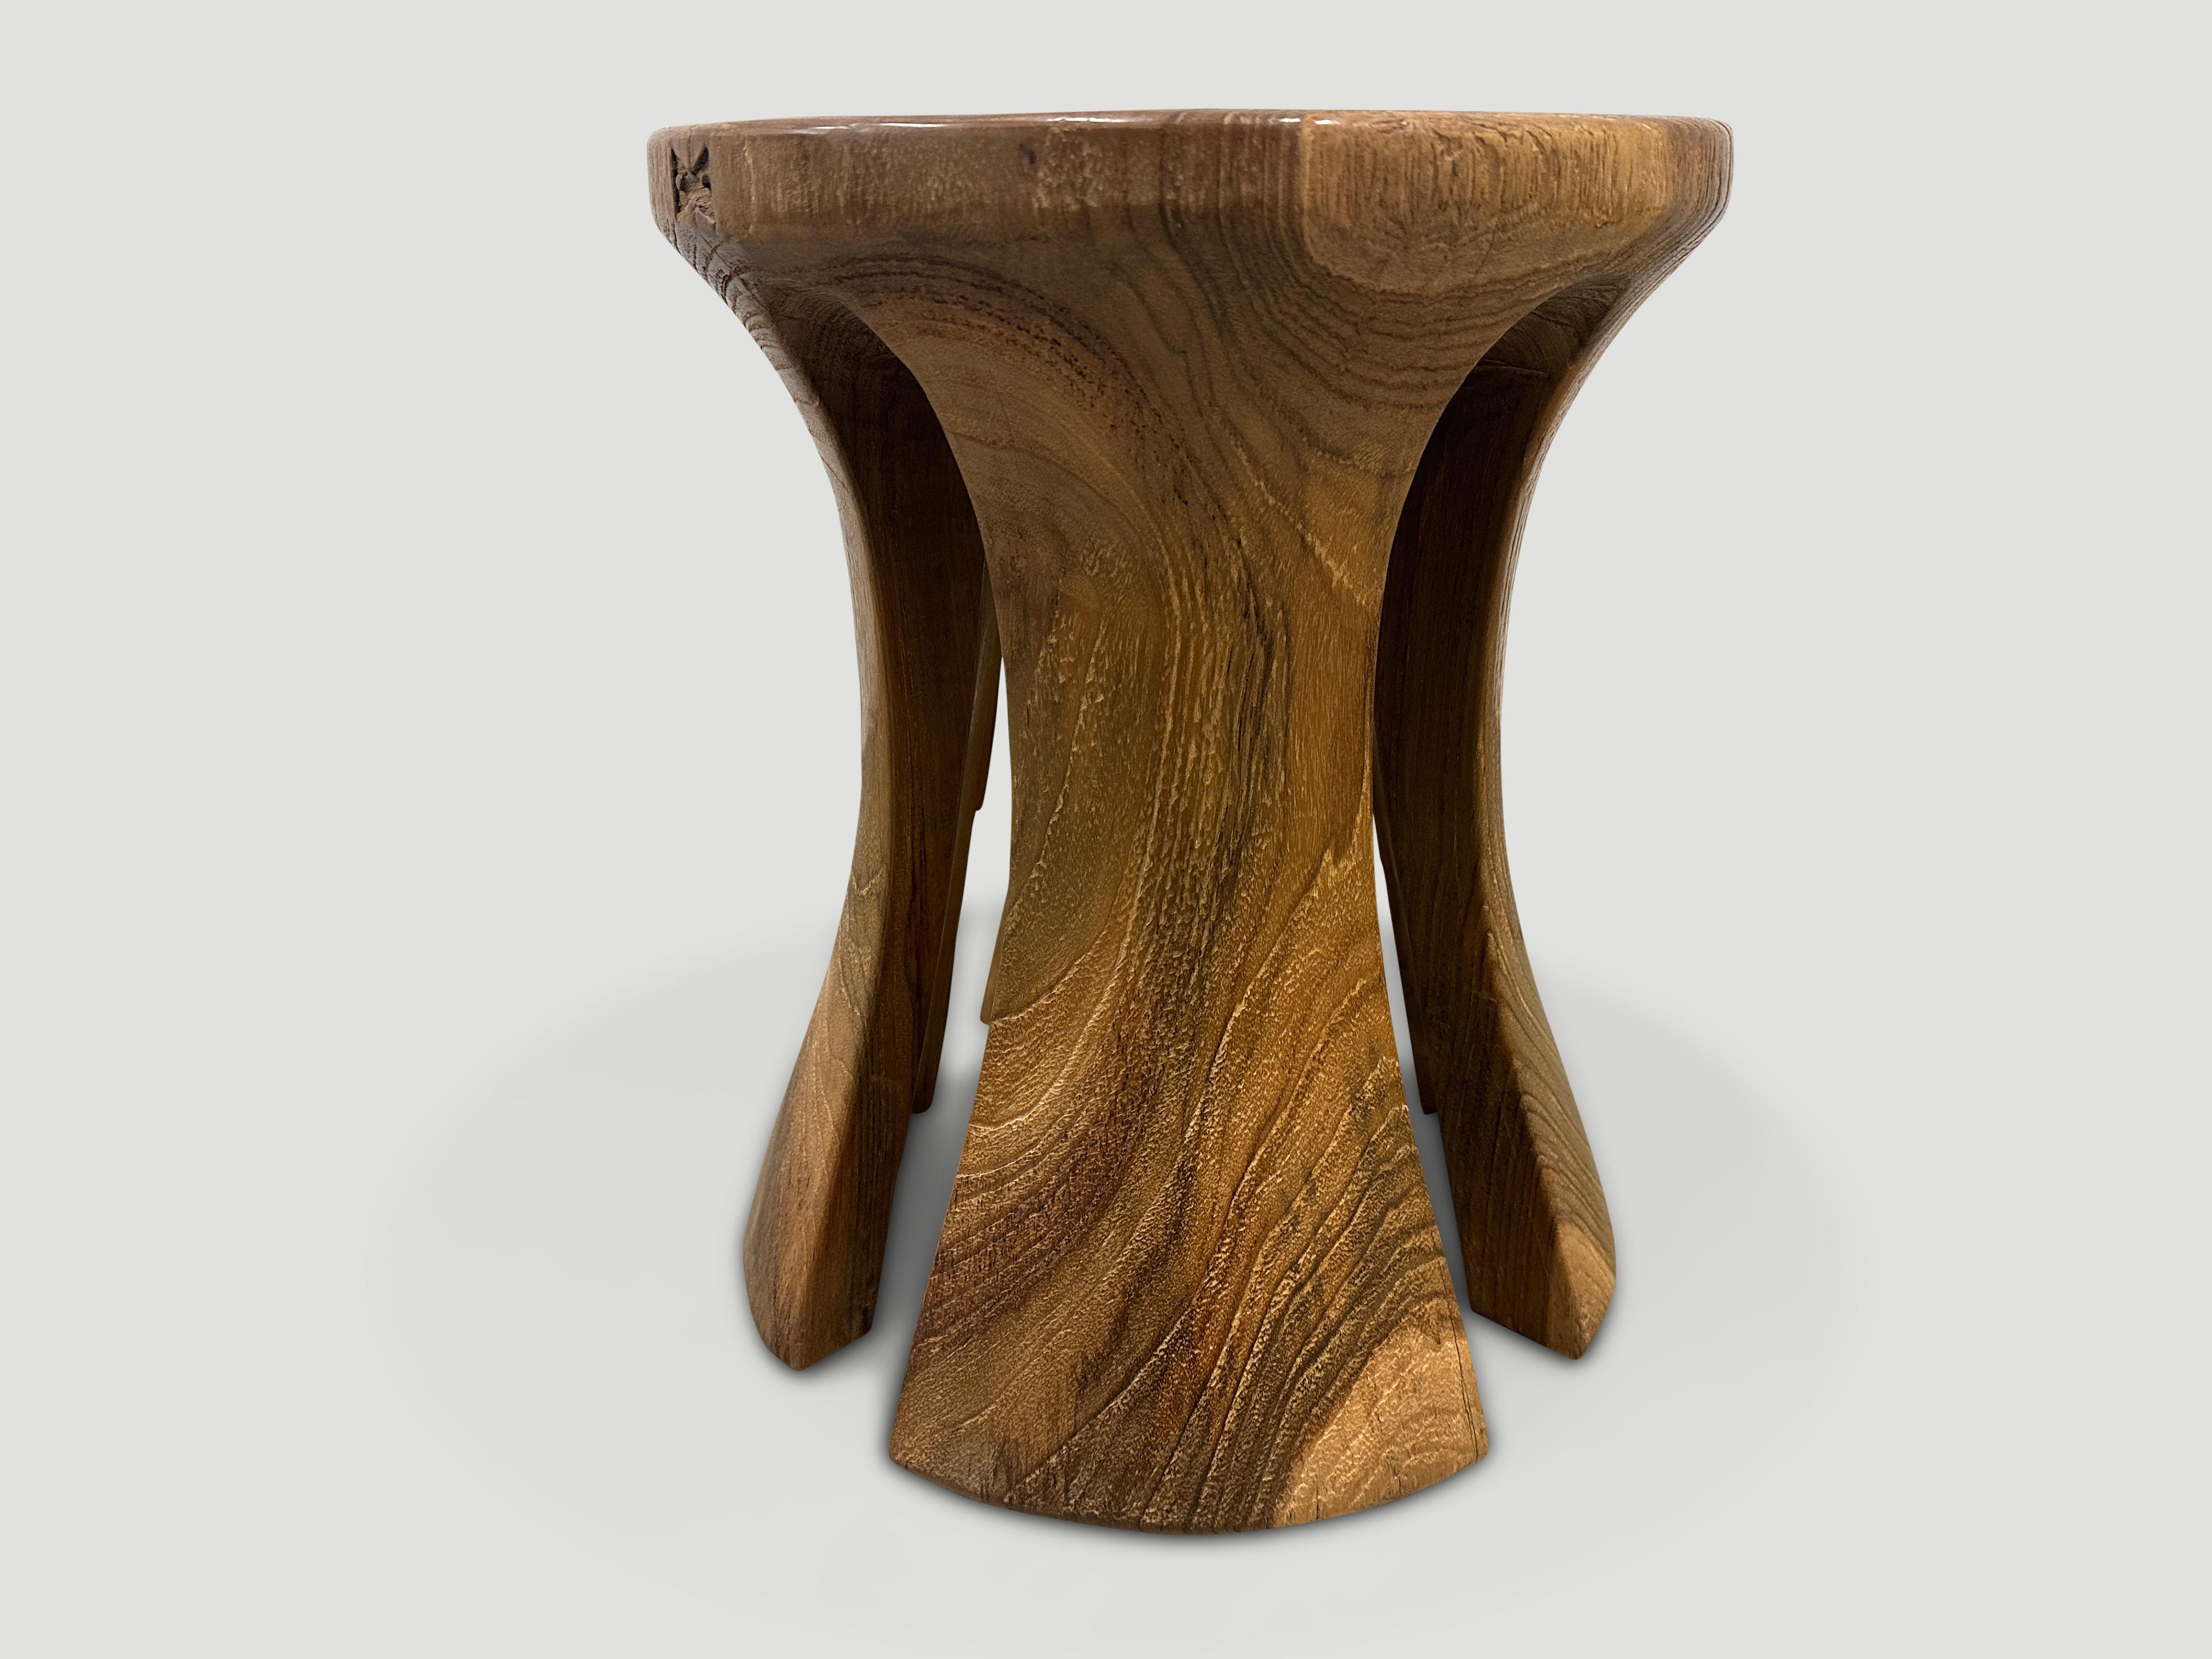 A century old teak wood mortar originally used to grind rice, is repurposed into this minimalist side table or stool. Part of the Mid Century Couture Collection, we first turned this ancient piece upside down and smoothed it out entirely and then